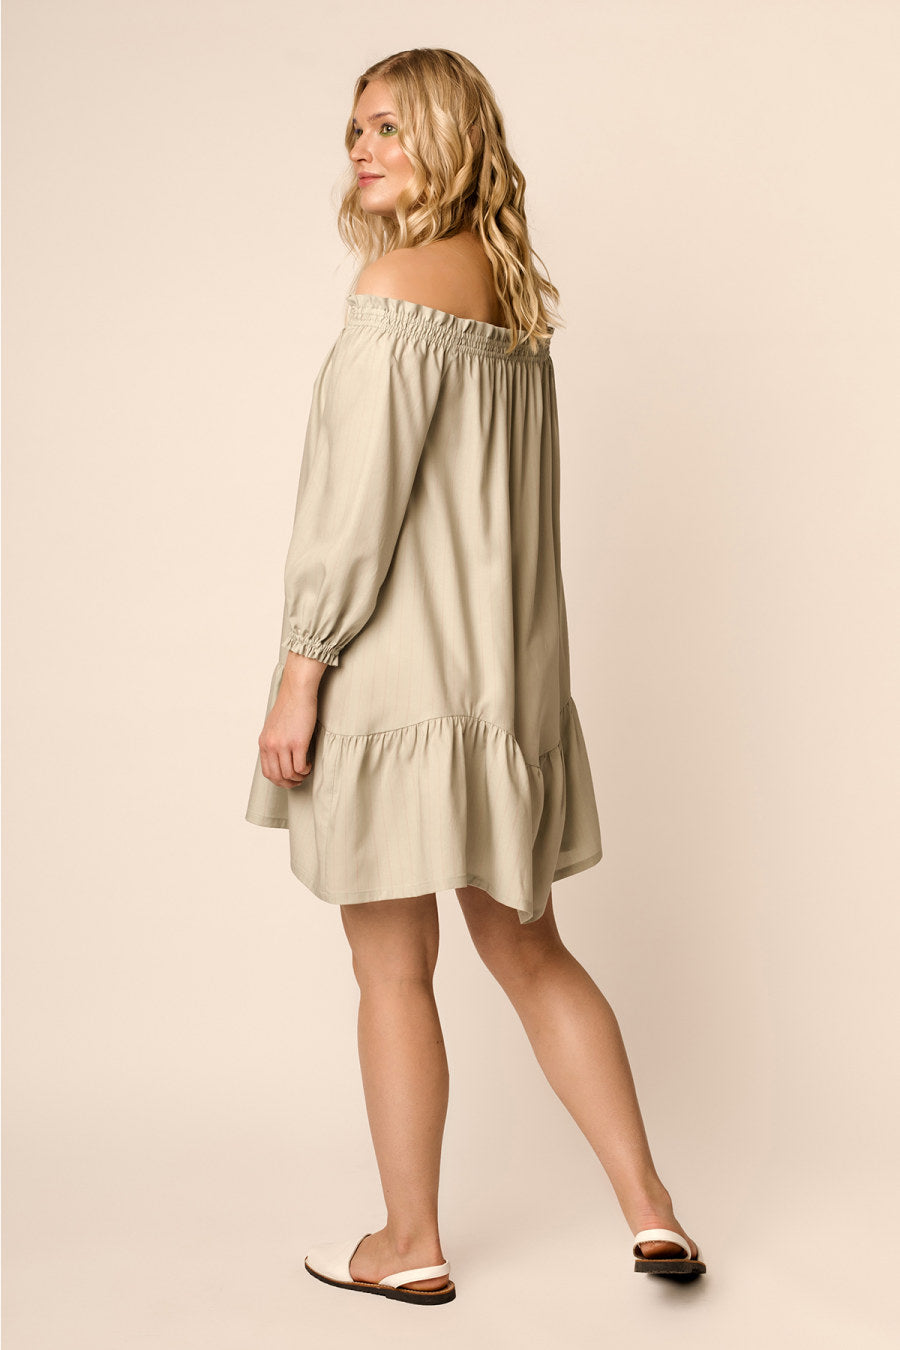 Named Patterns Ilma smock dress and top